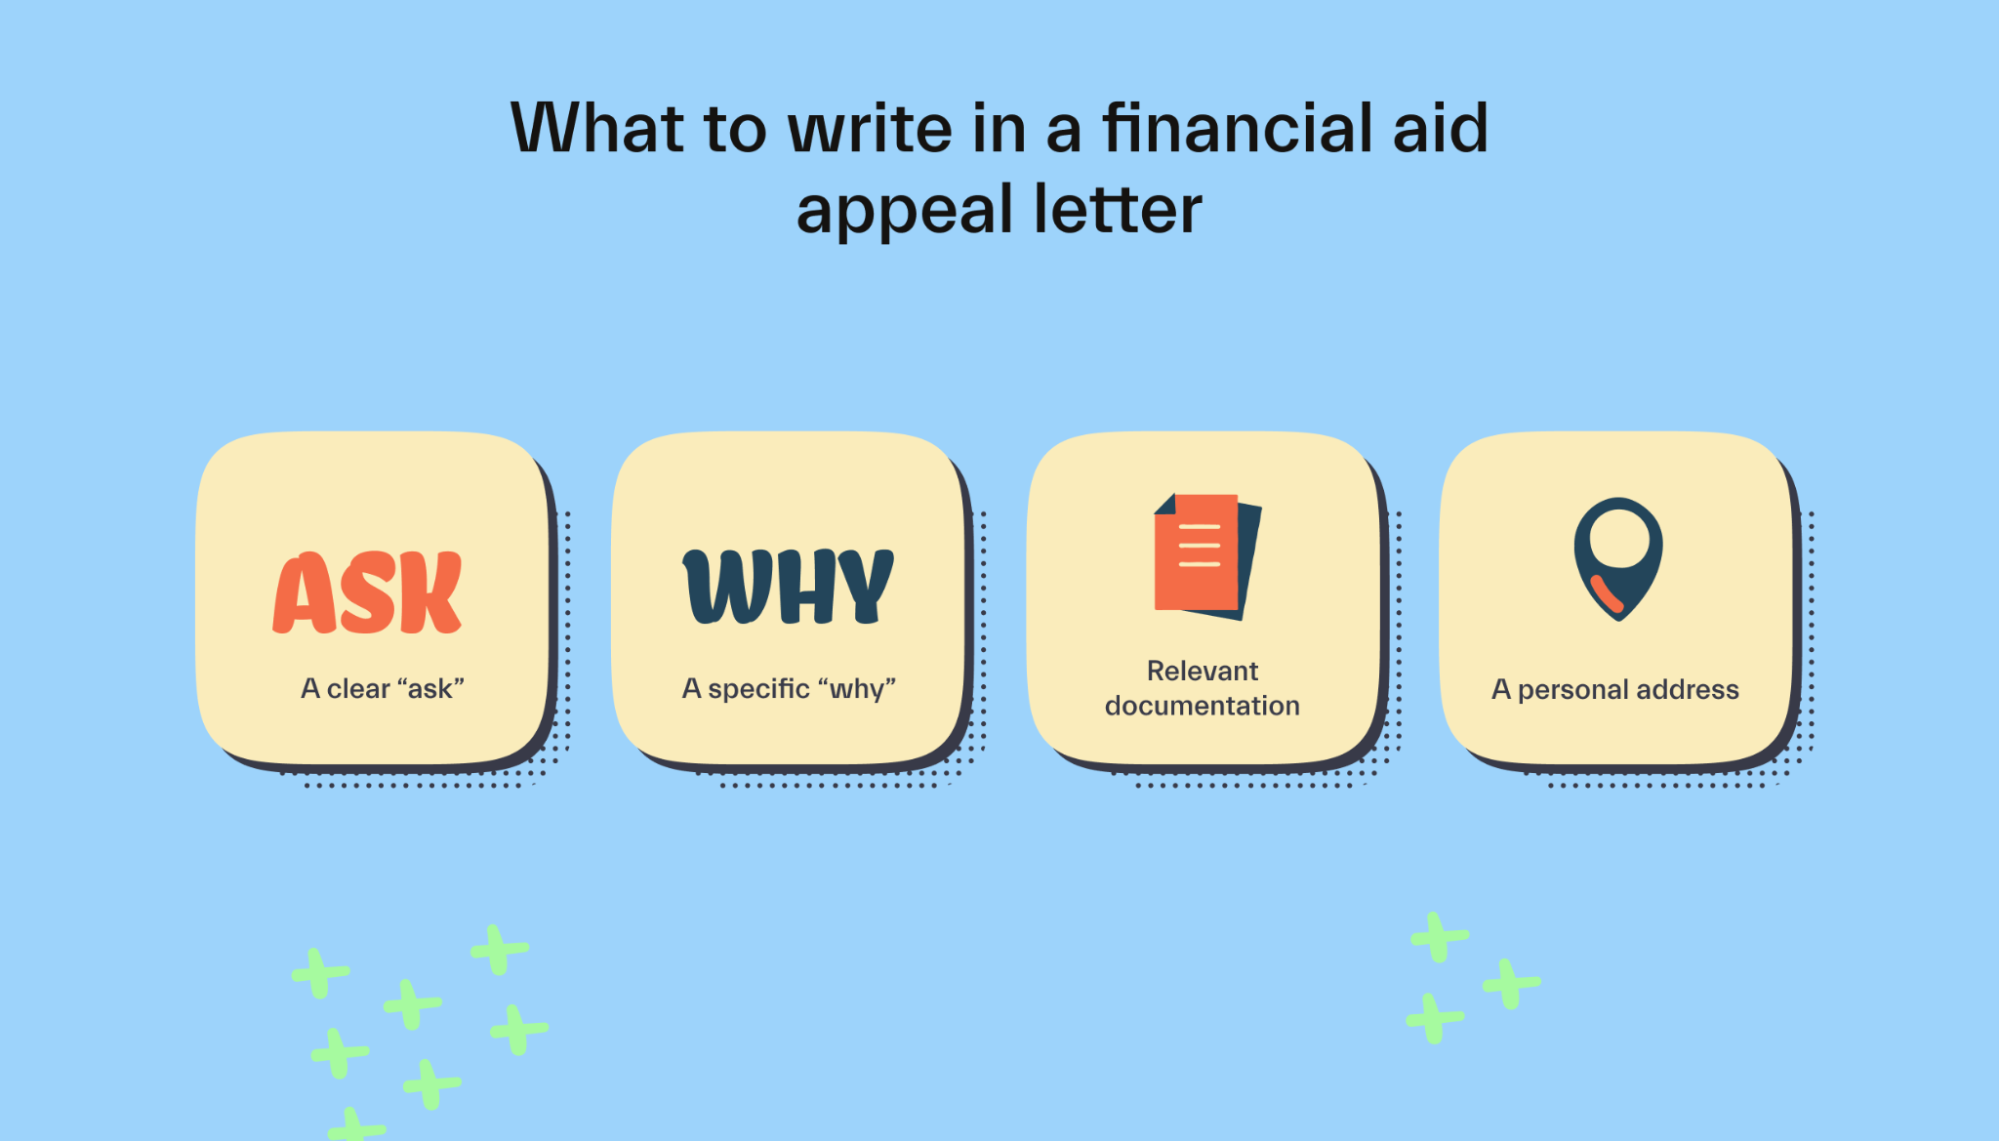 What to include in financial aid appeal letter